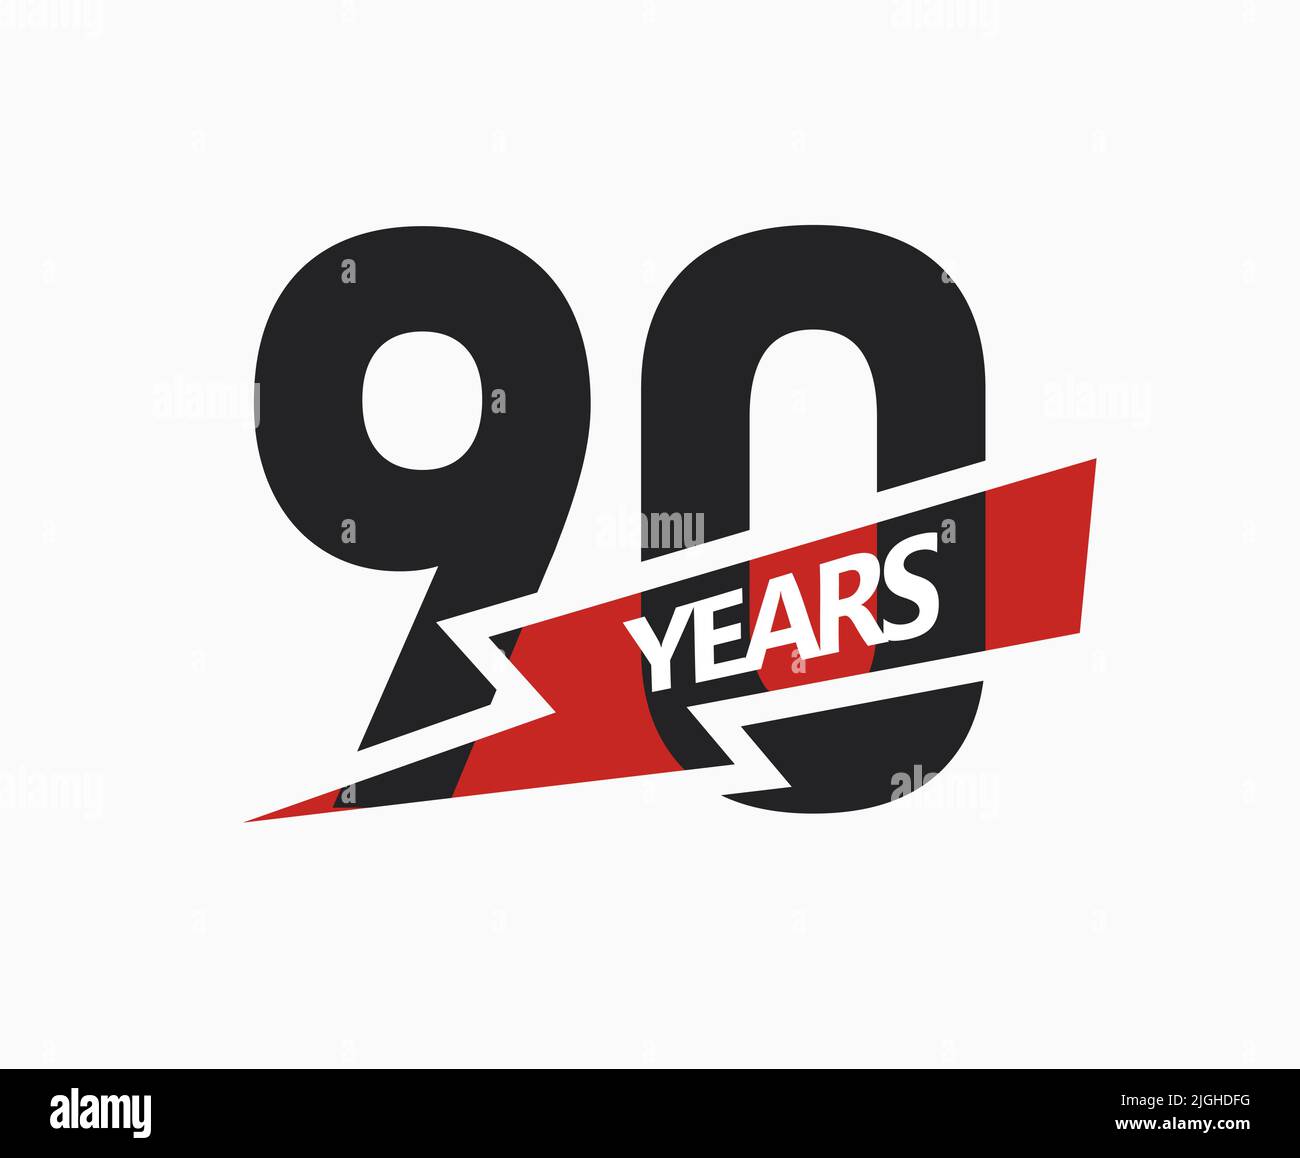 90 years of business, jubilee logo. 90th Anniversary sign. Modern graphic design for company birthday. Isolated vector illustration. Stock Vector